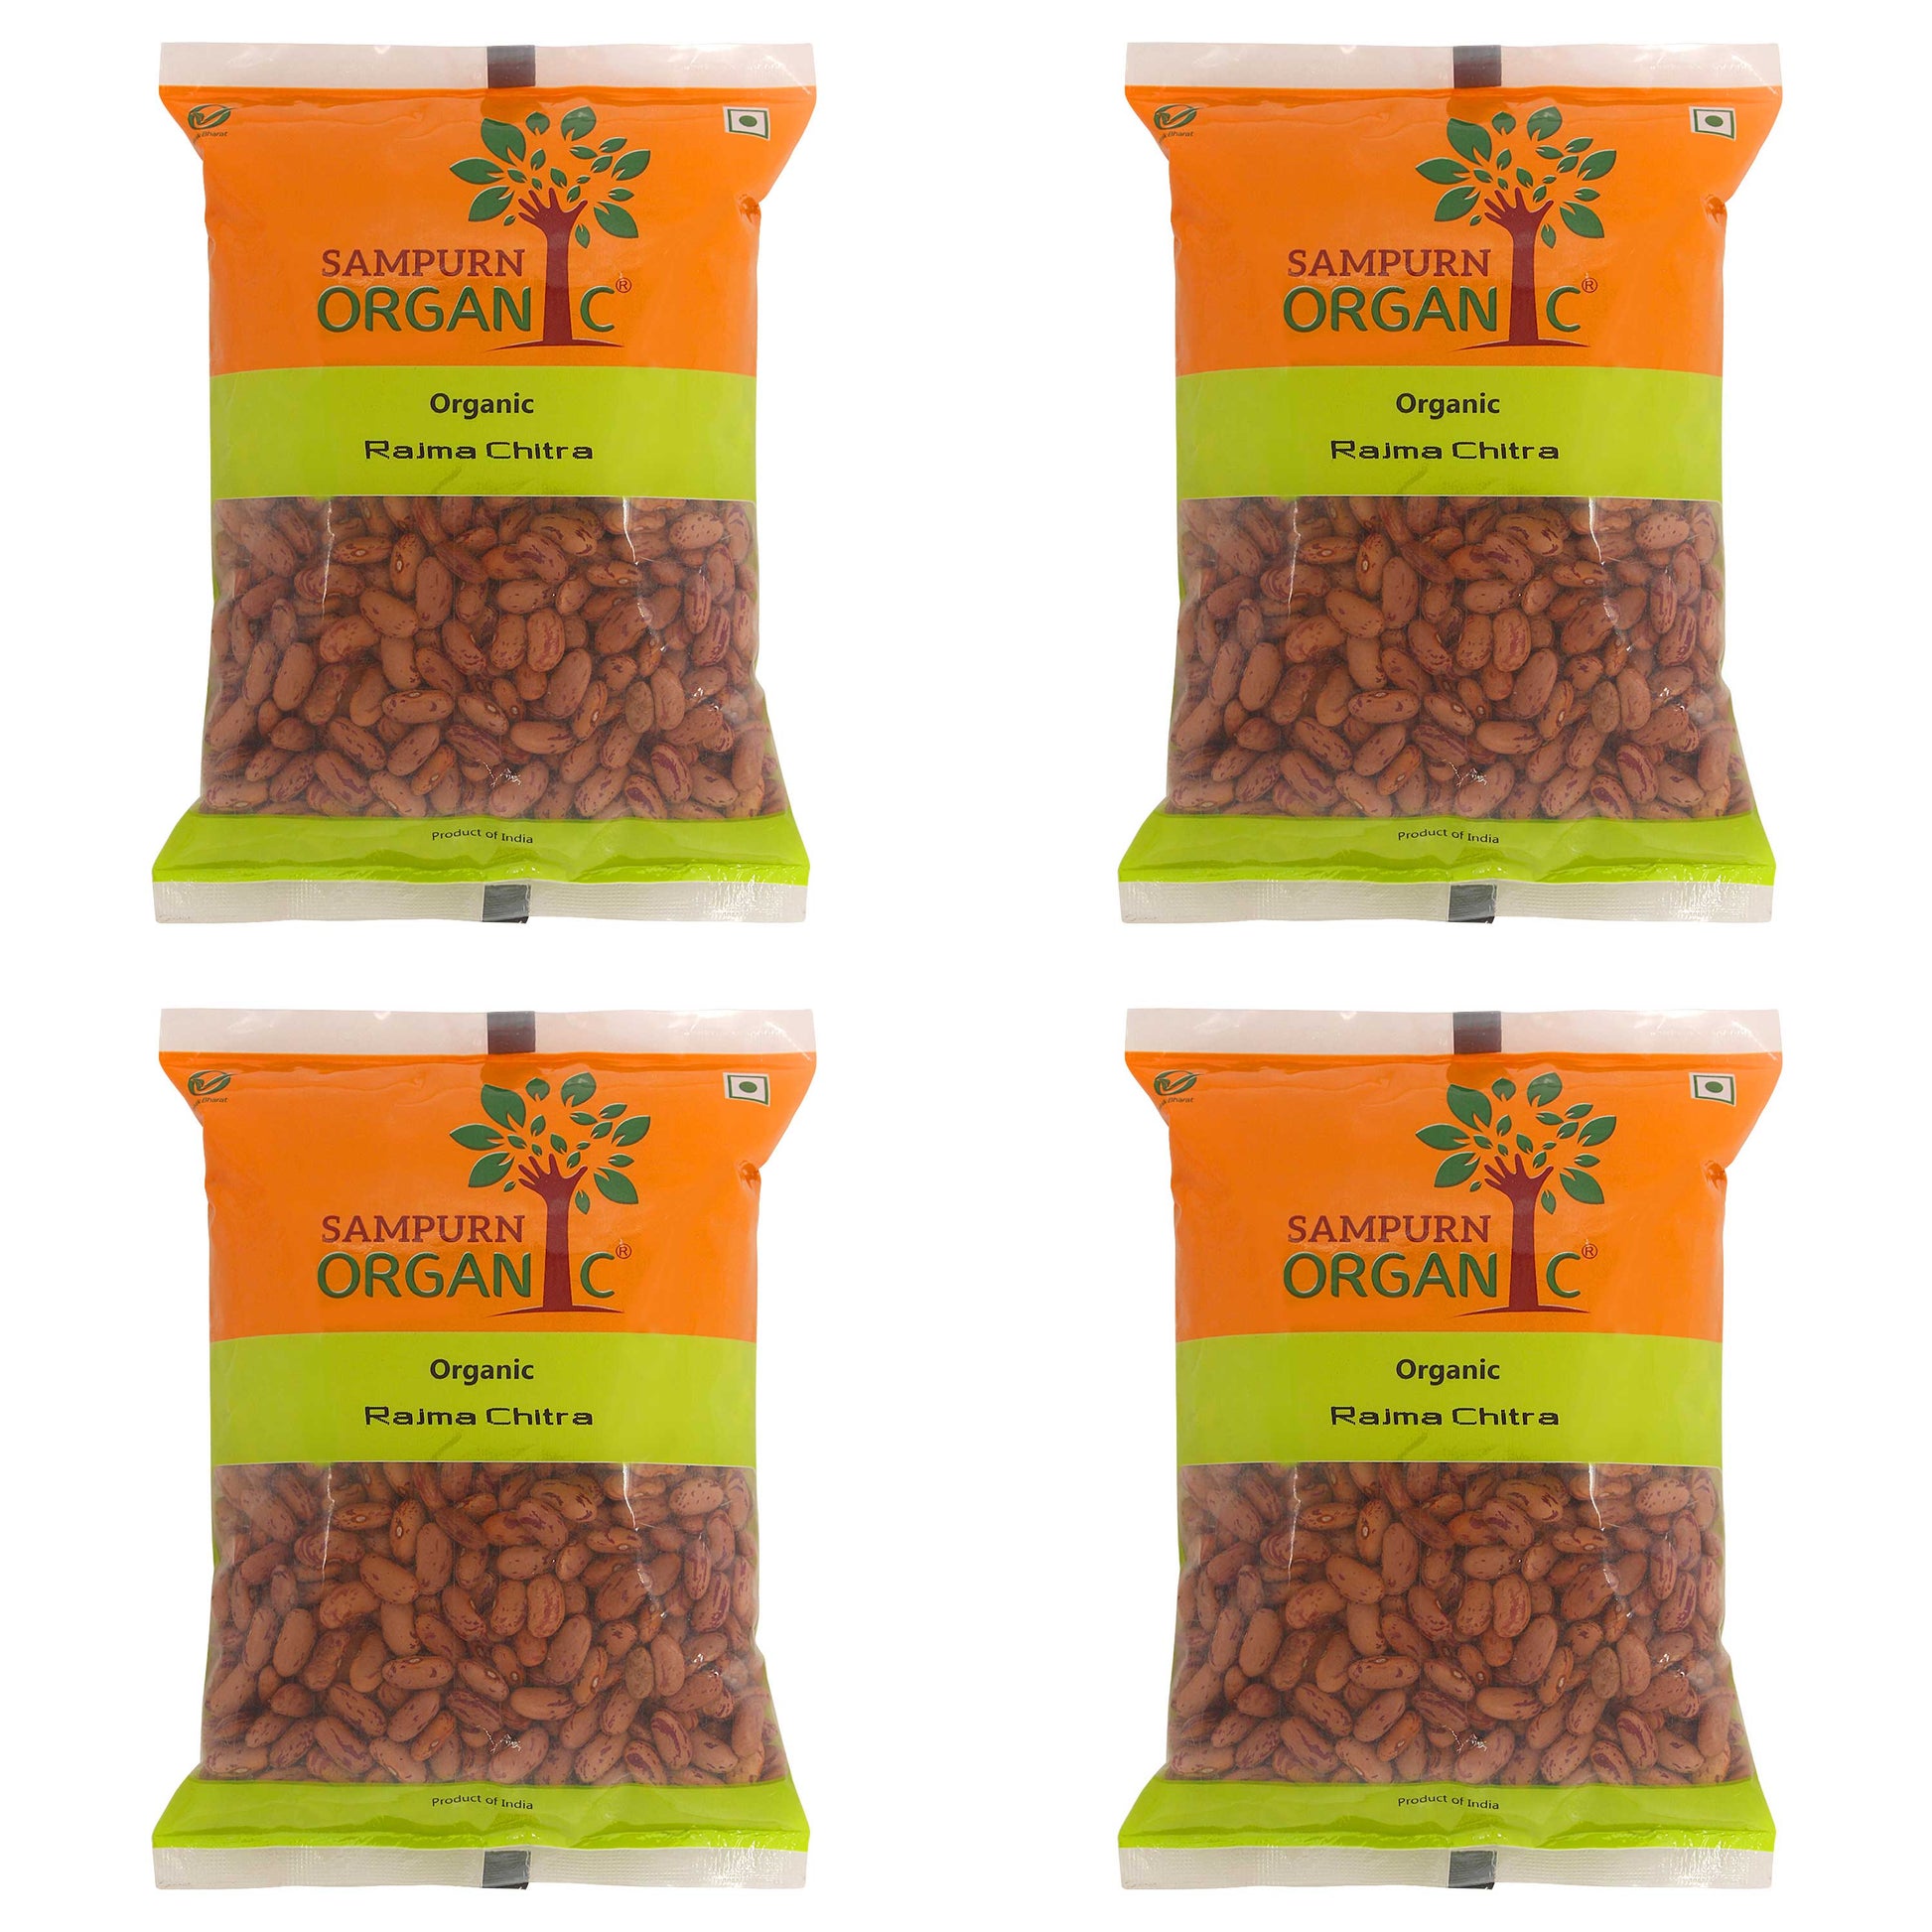 Sampurn Organic Rajma Chitra,Organic rajma chitra, a legume native to the kashmir region and used in traditional indian cuisine, offers a subtle, distinctive flavor, and can be used to prepare the delicious classic indian comfort food dish, rajma.